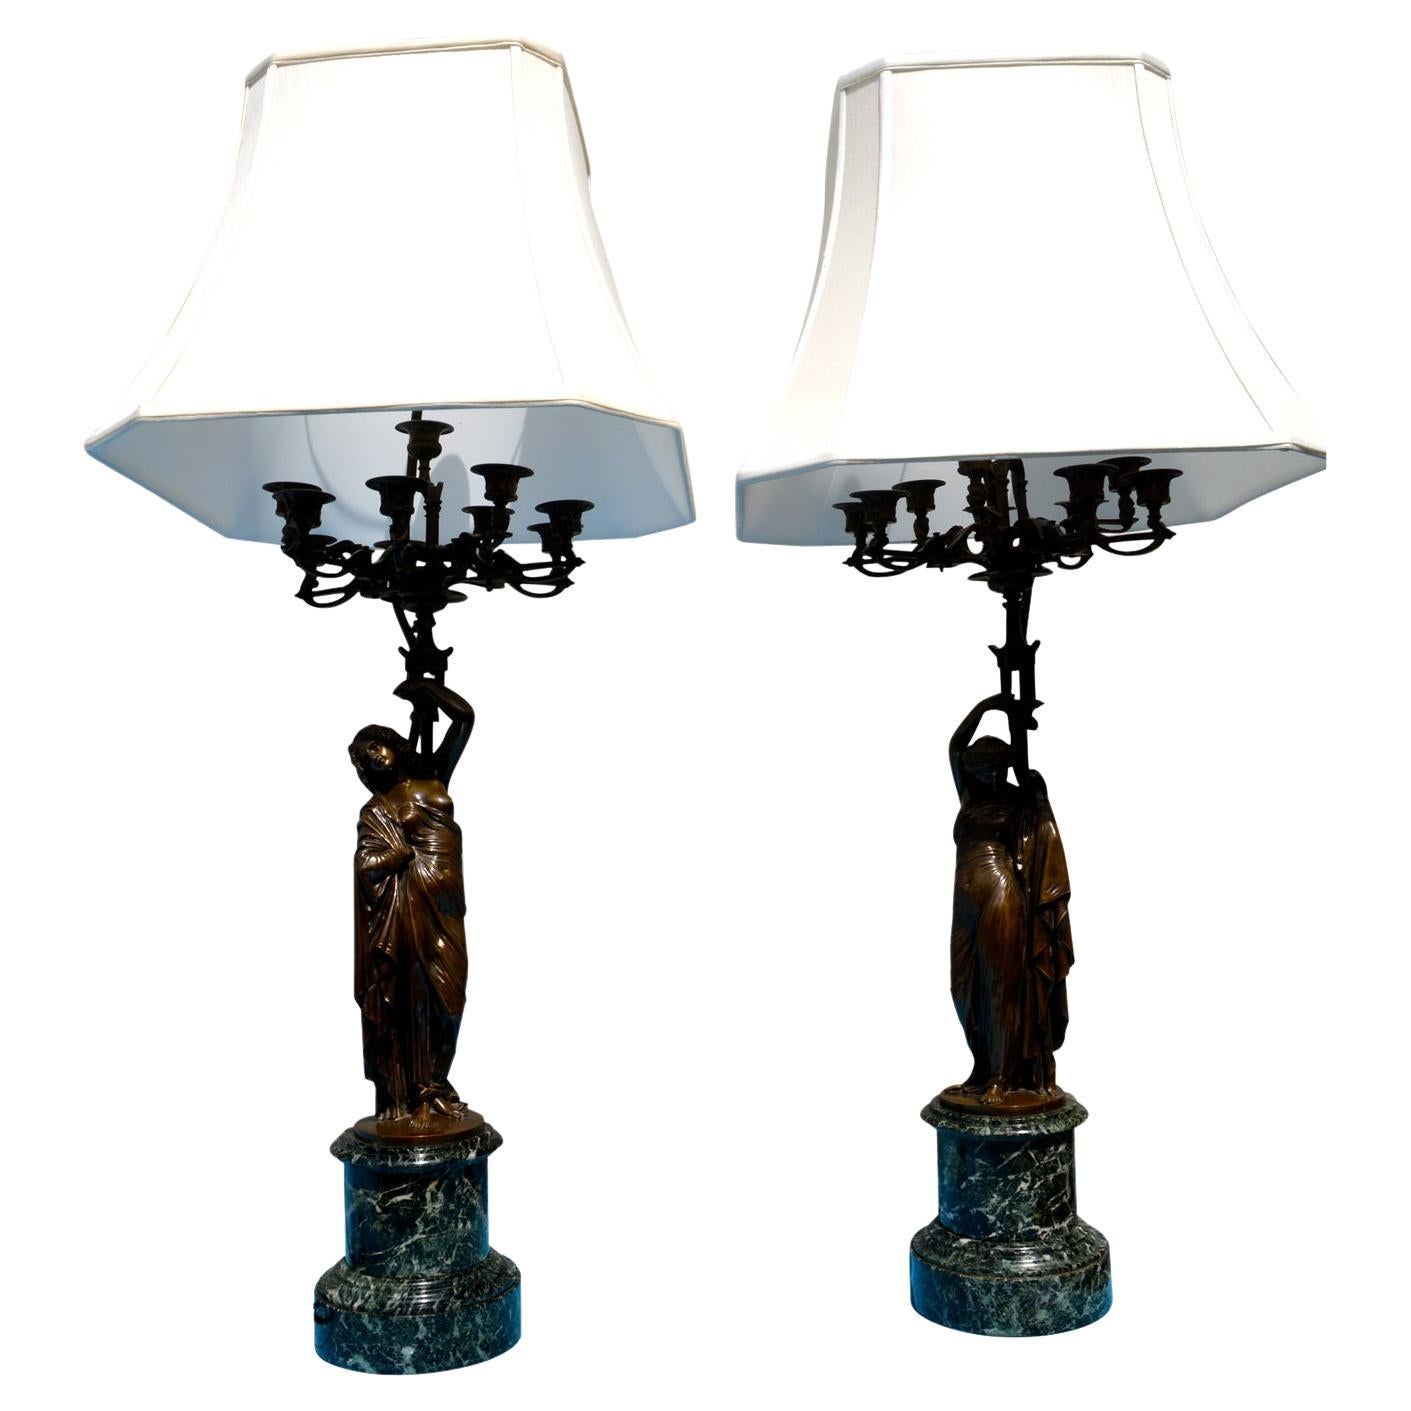 Pair of French 19th Century Figurative Patinated Bronze Candelabra Lamps